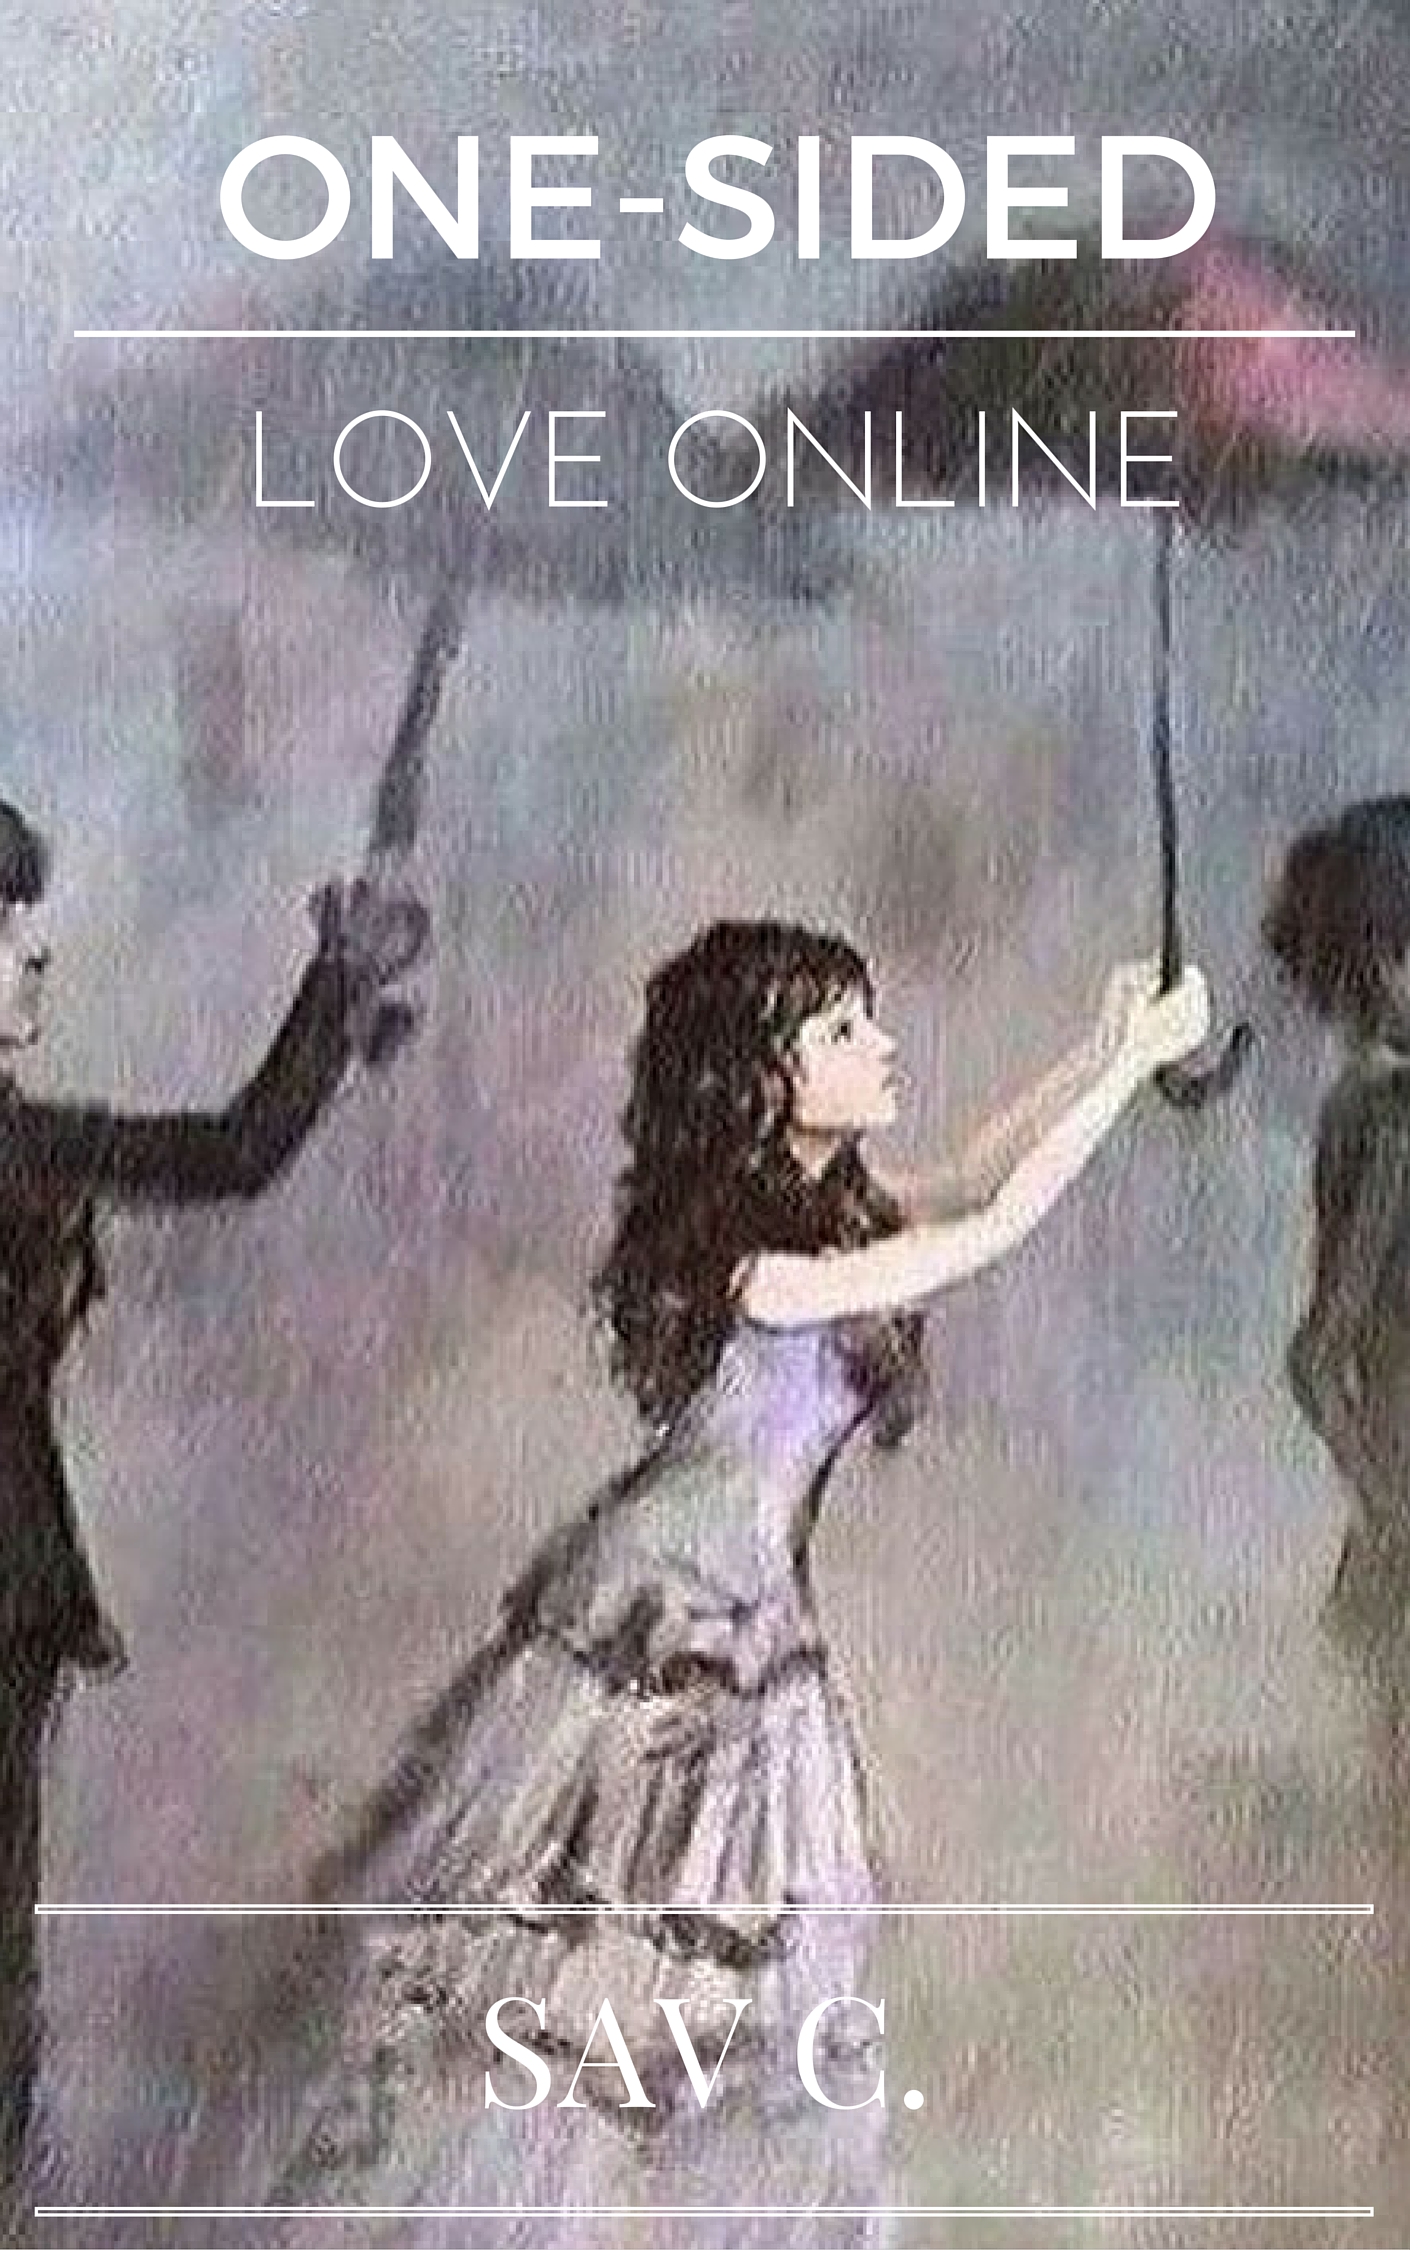 Smashwords – One-Sided Love Online – a book by Sav C.